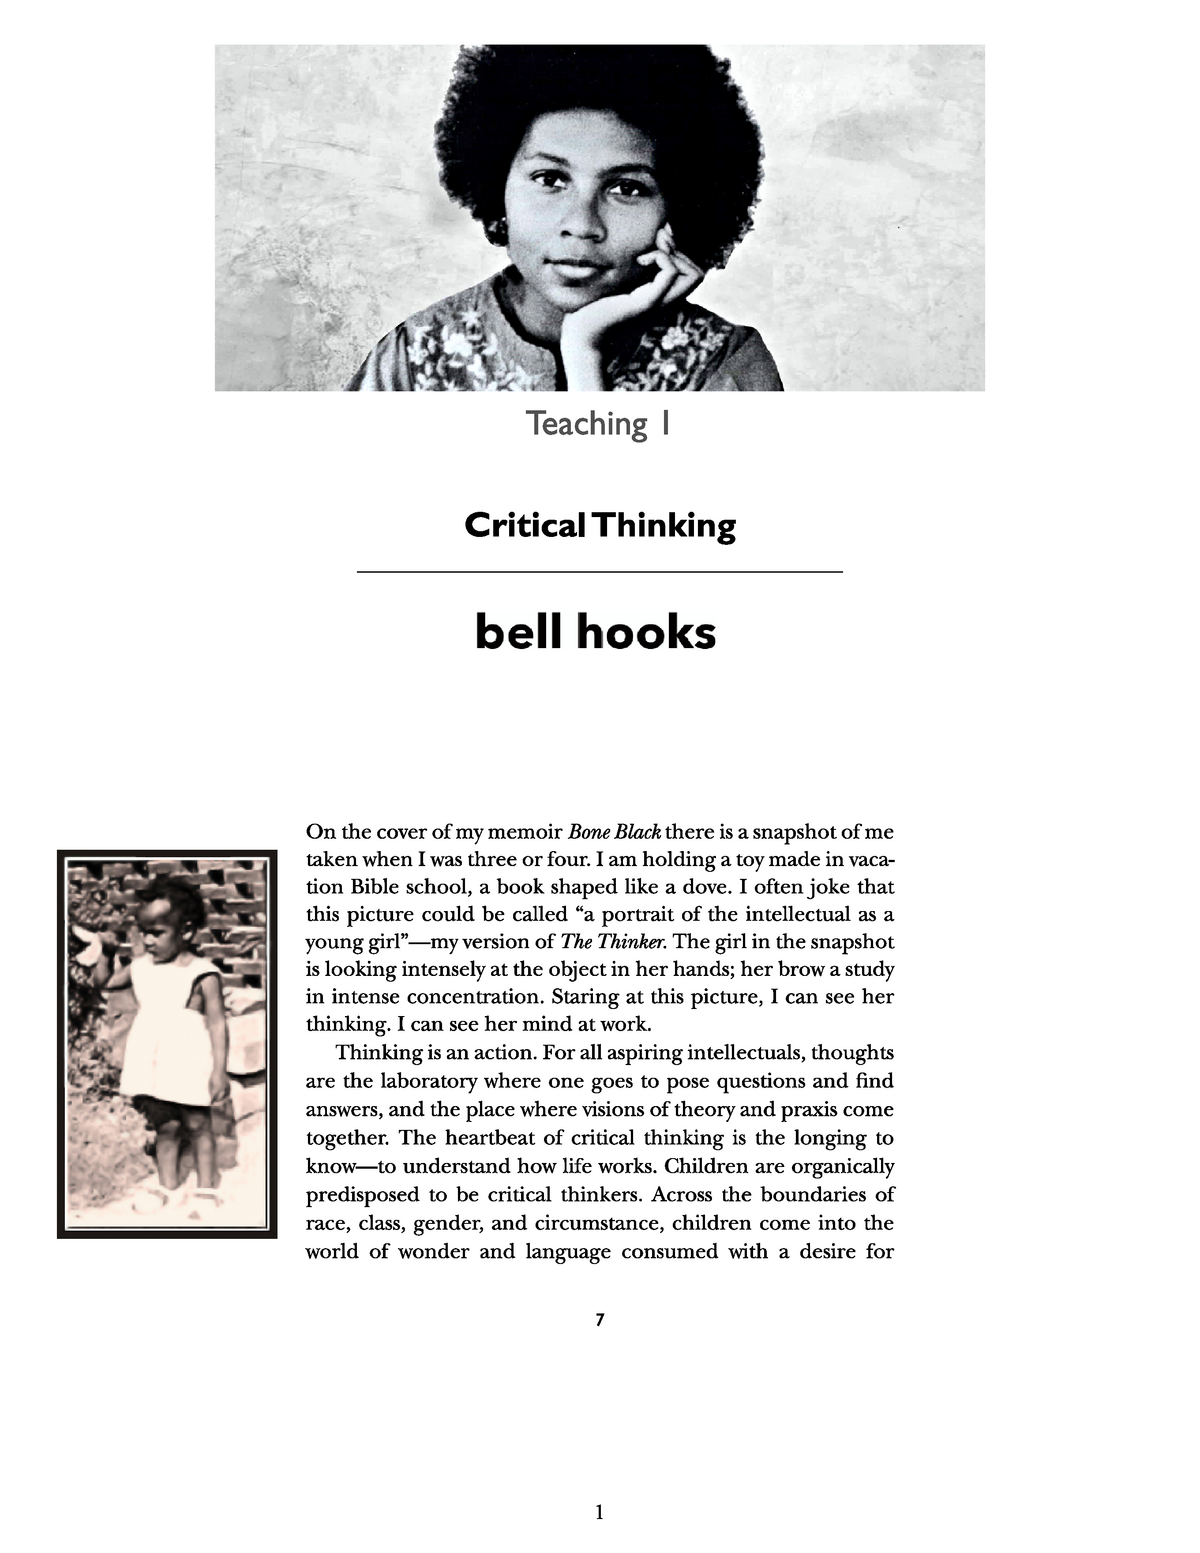 bell hooks thesis